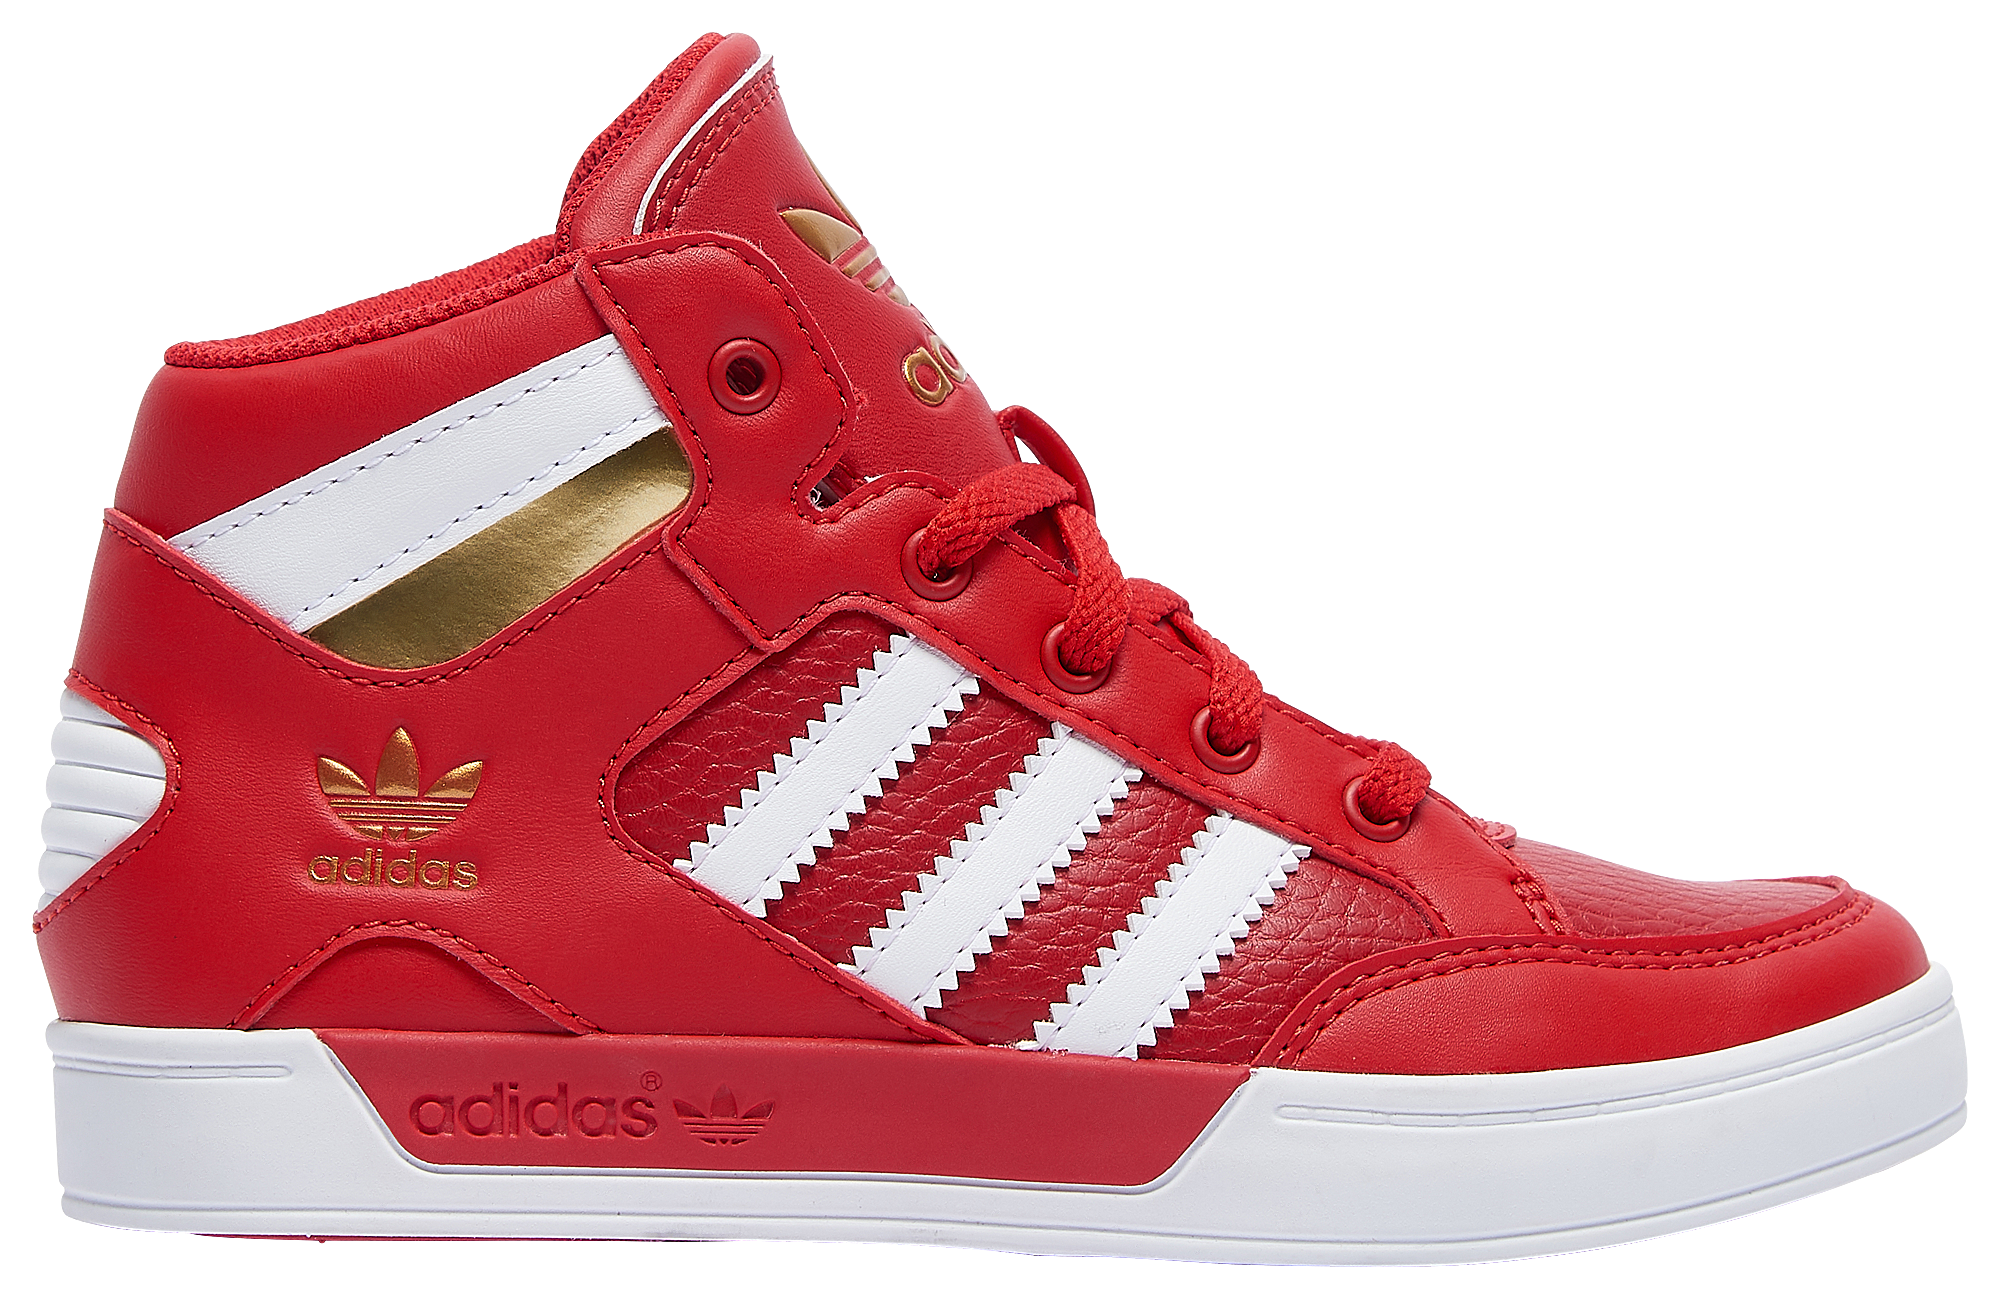 boys red adidas shoes